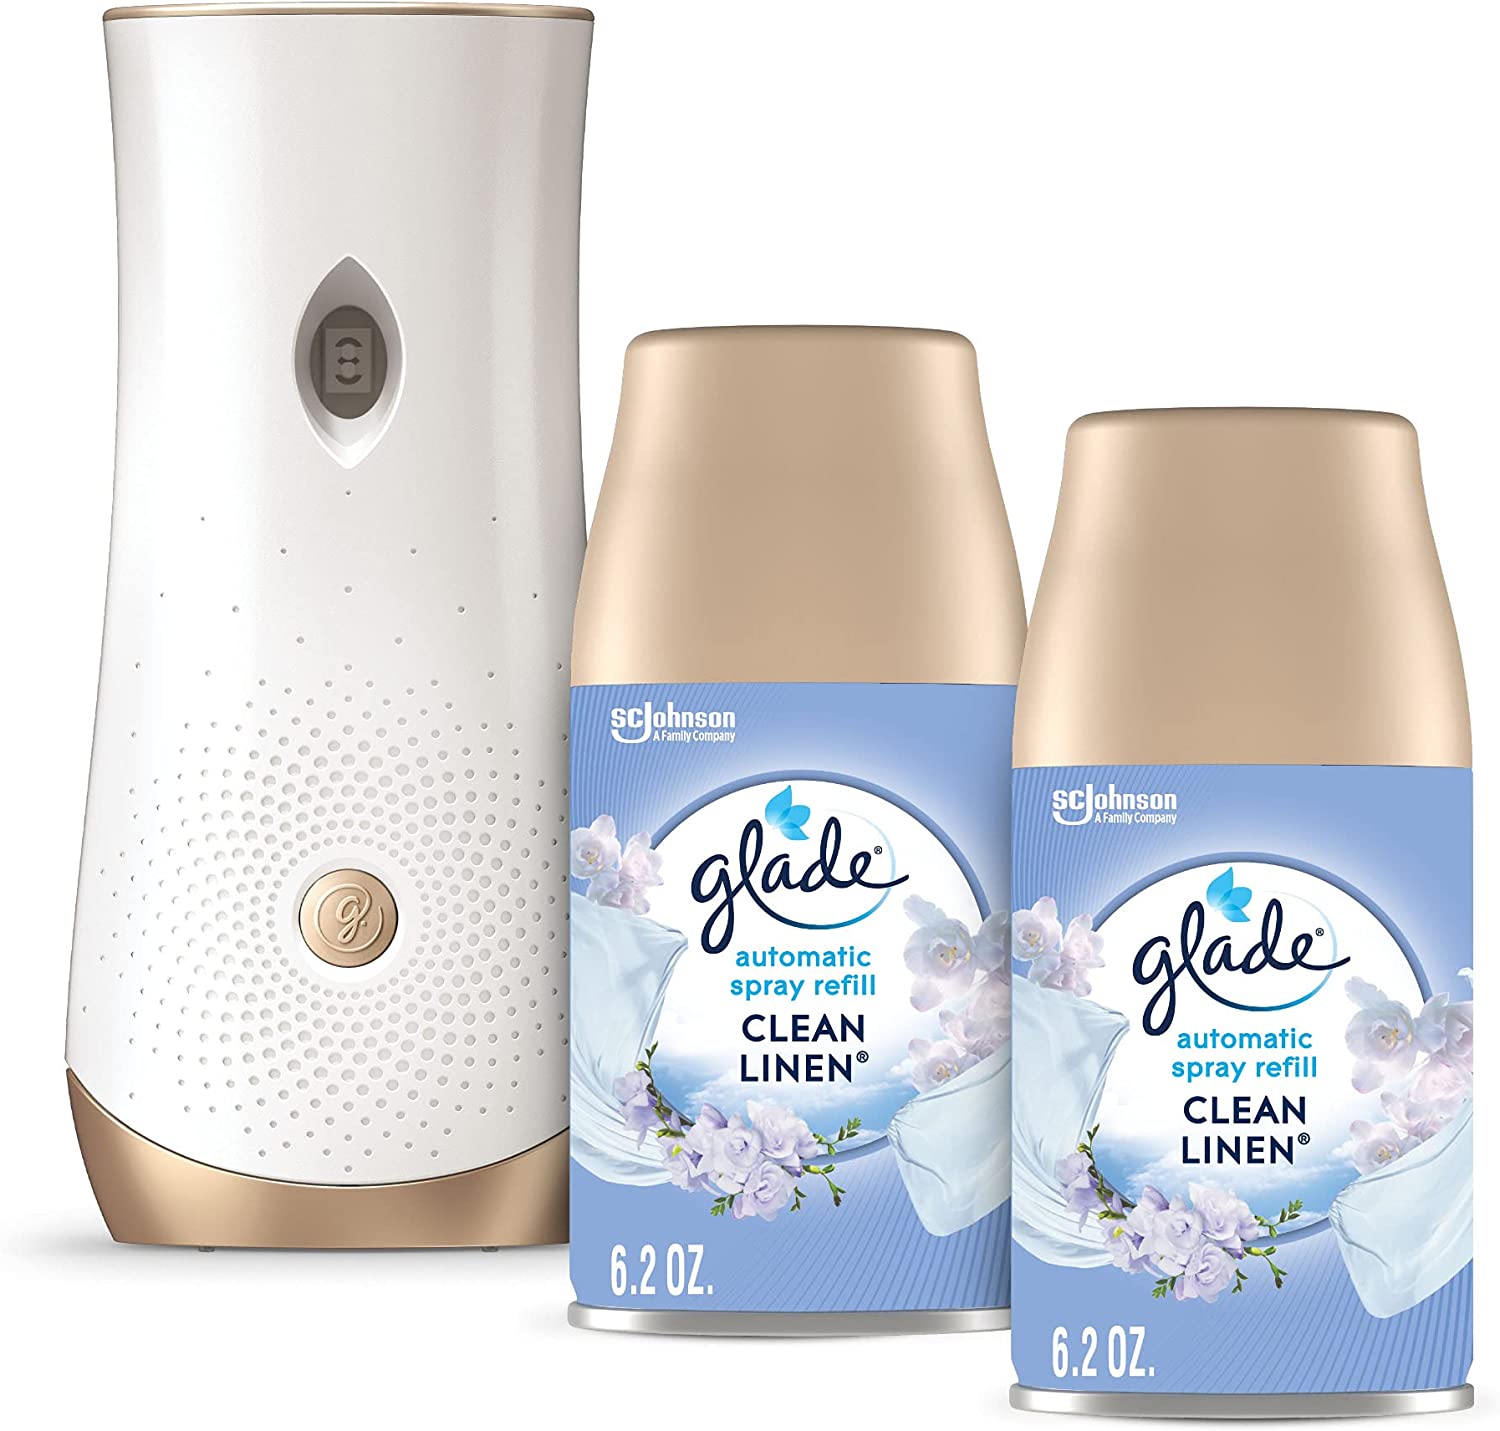 Glade Automatic Spray Refill and Holder Kit, Air [...]